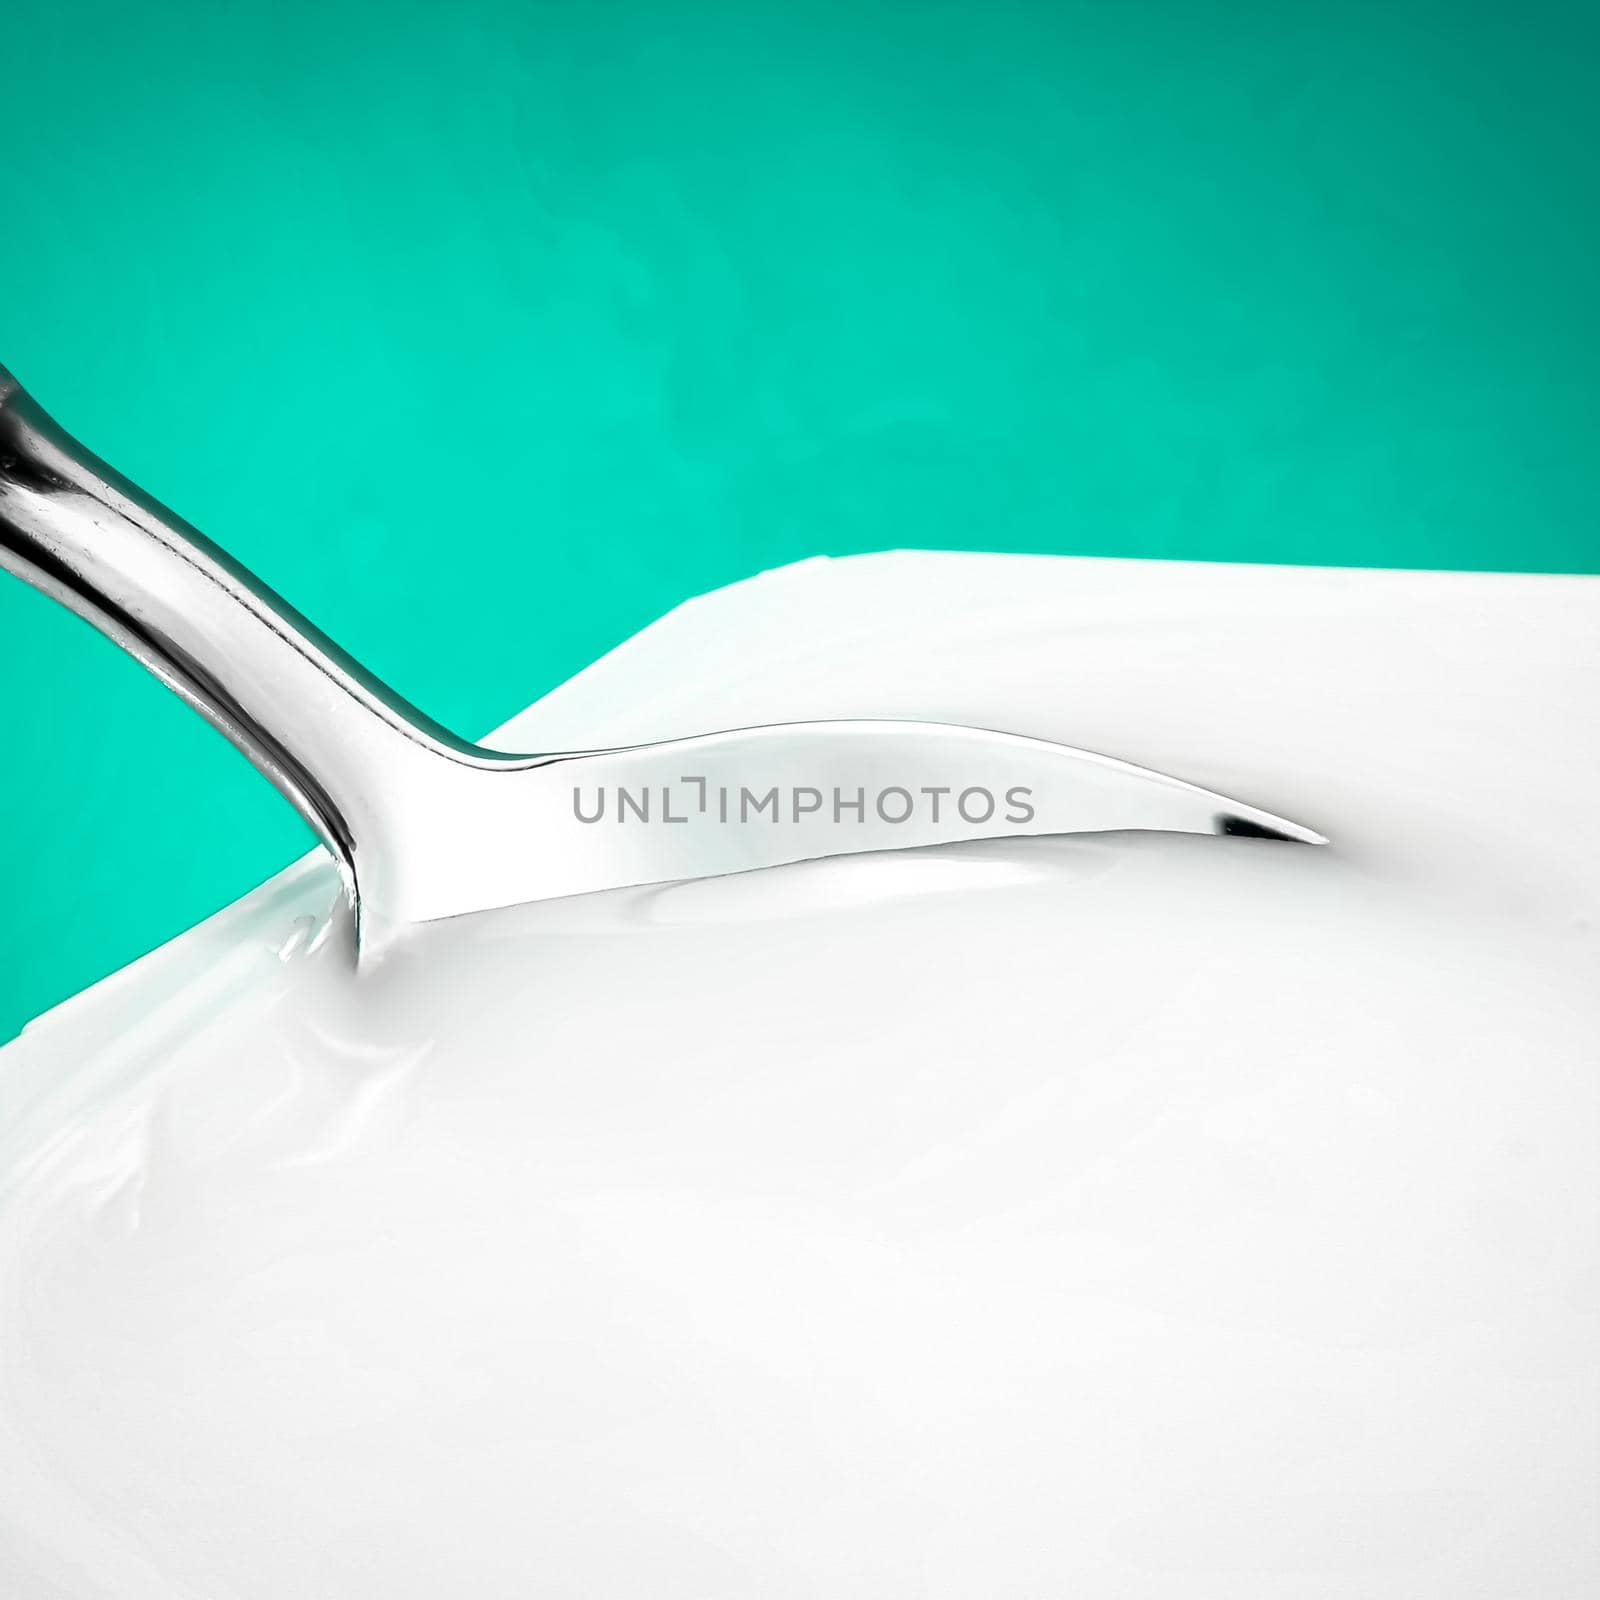 Yogurt cup and silver spoon on green background, white plastic container with yoghurt cream, fresh dairy product for healthy diet and nutrition balance.